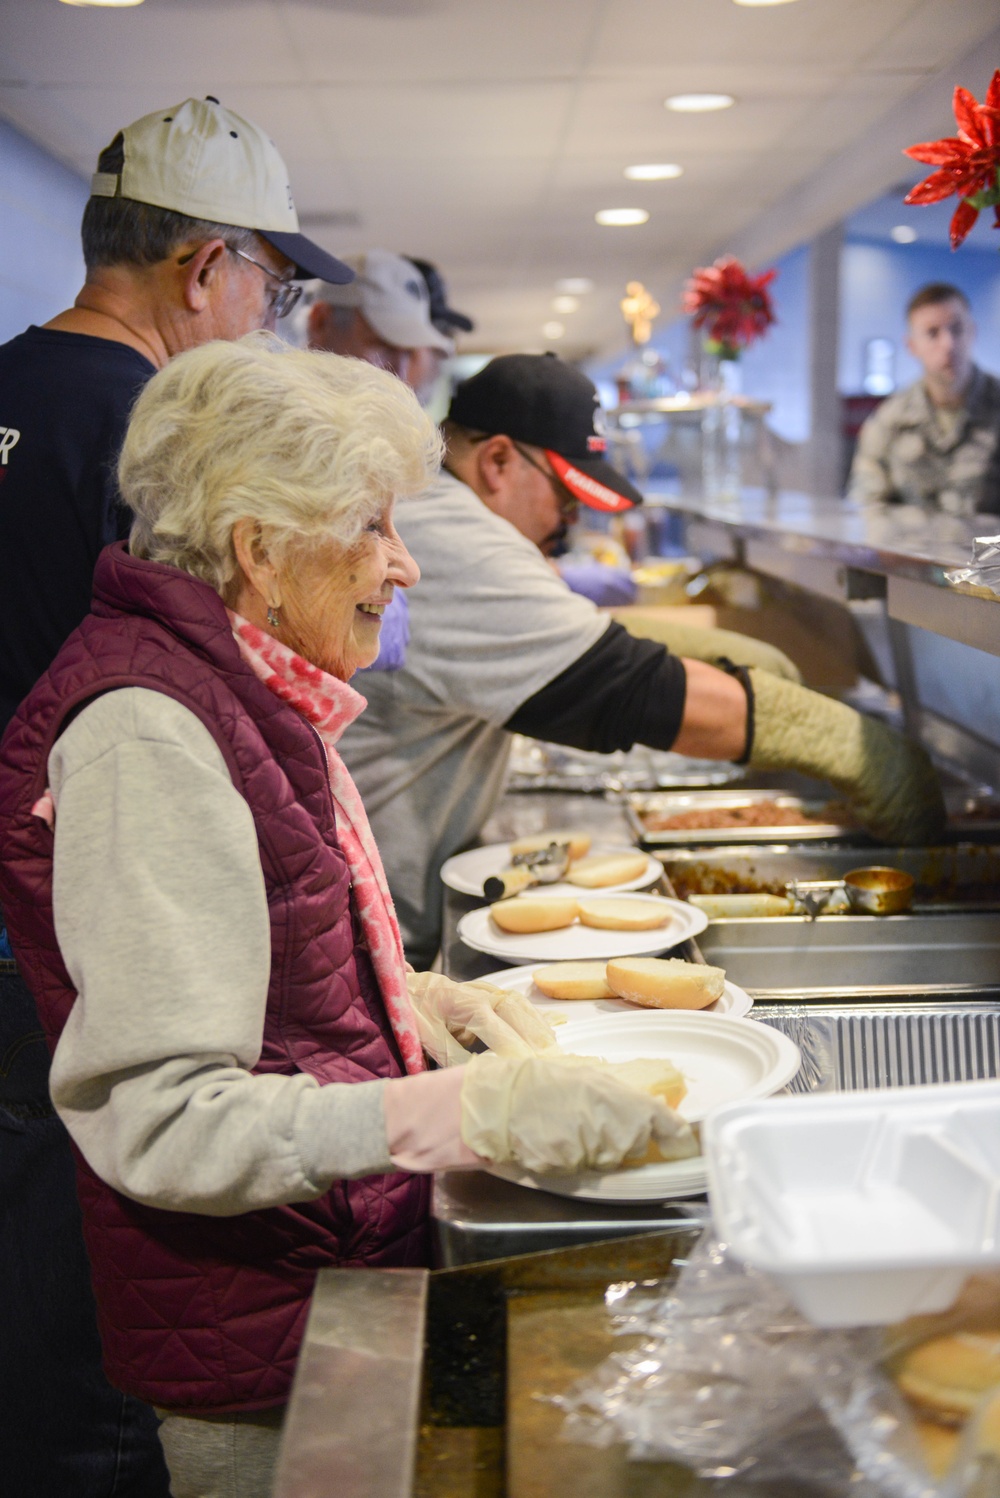 Military support organizations serve lunch at Ellington Field JRB